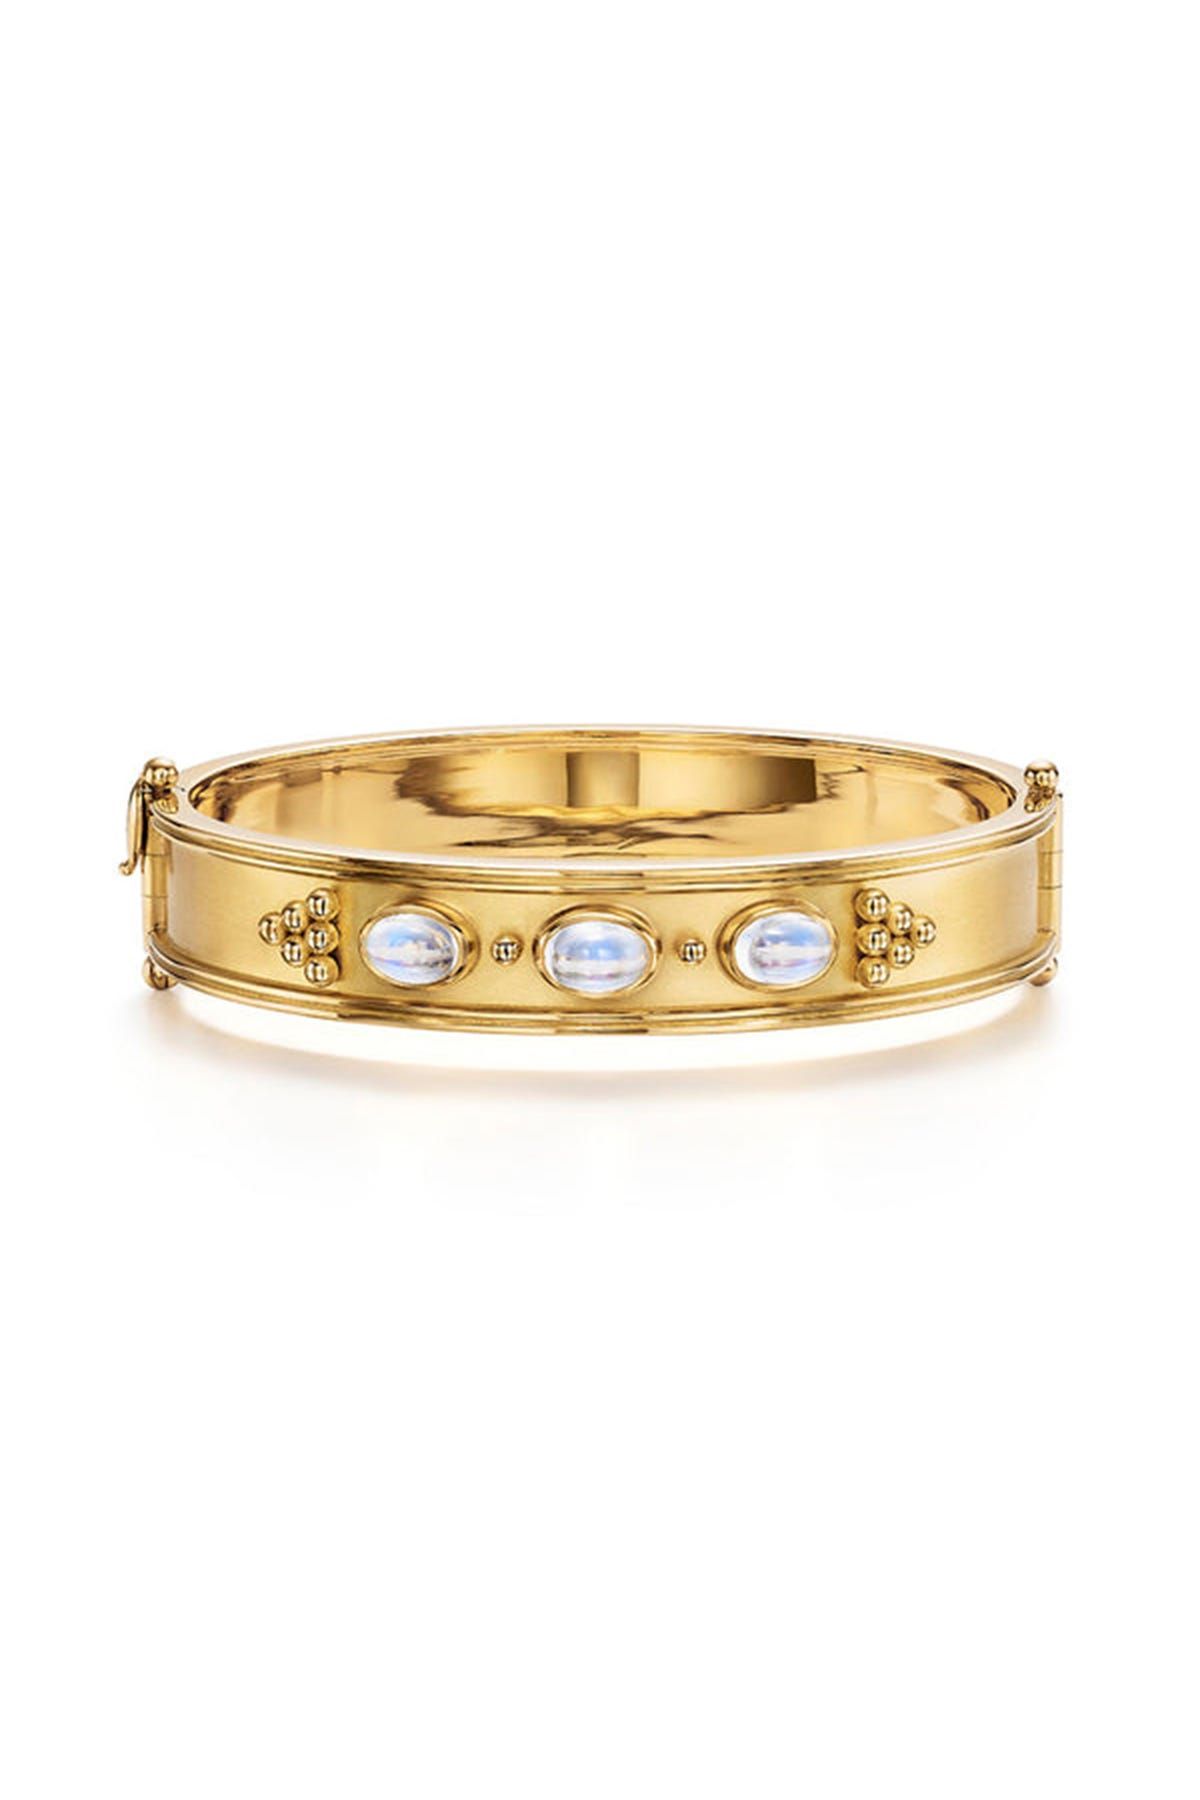 20 Best Designer Bracelets That Are The Perfect Glam Accessory